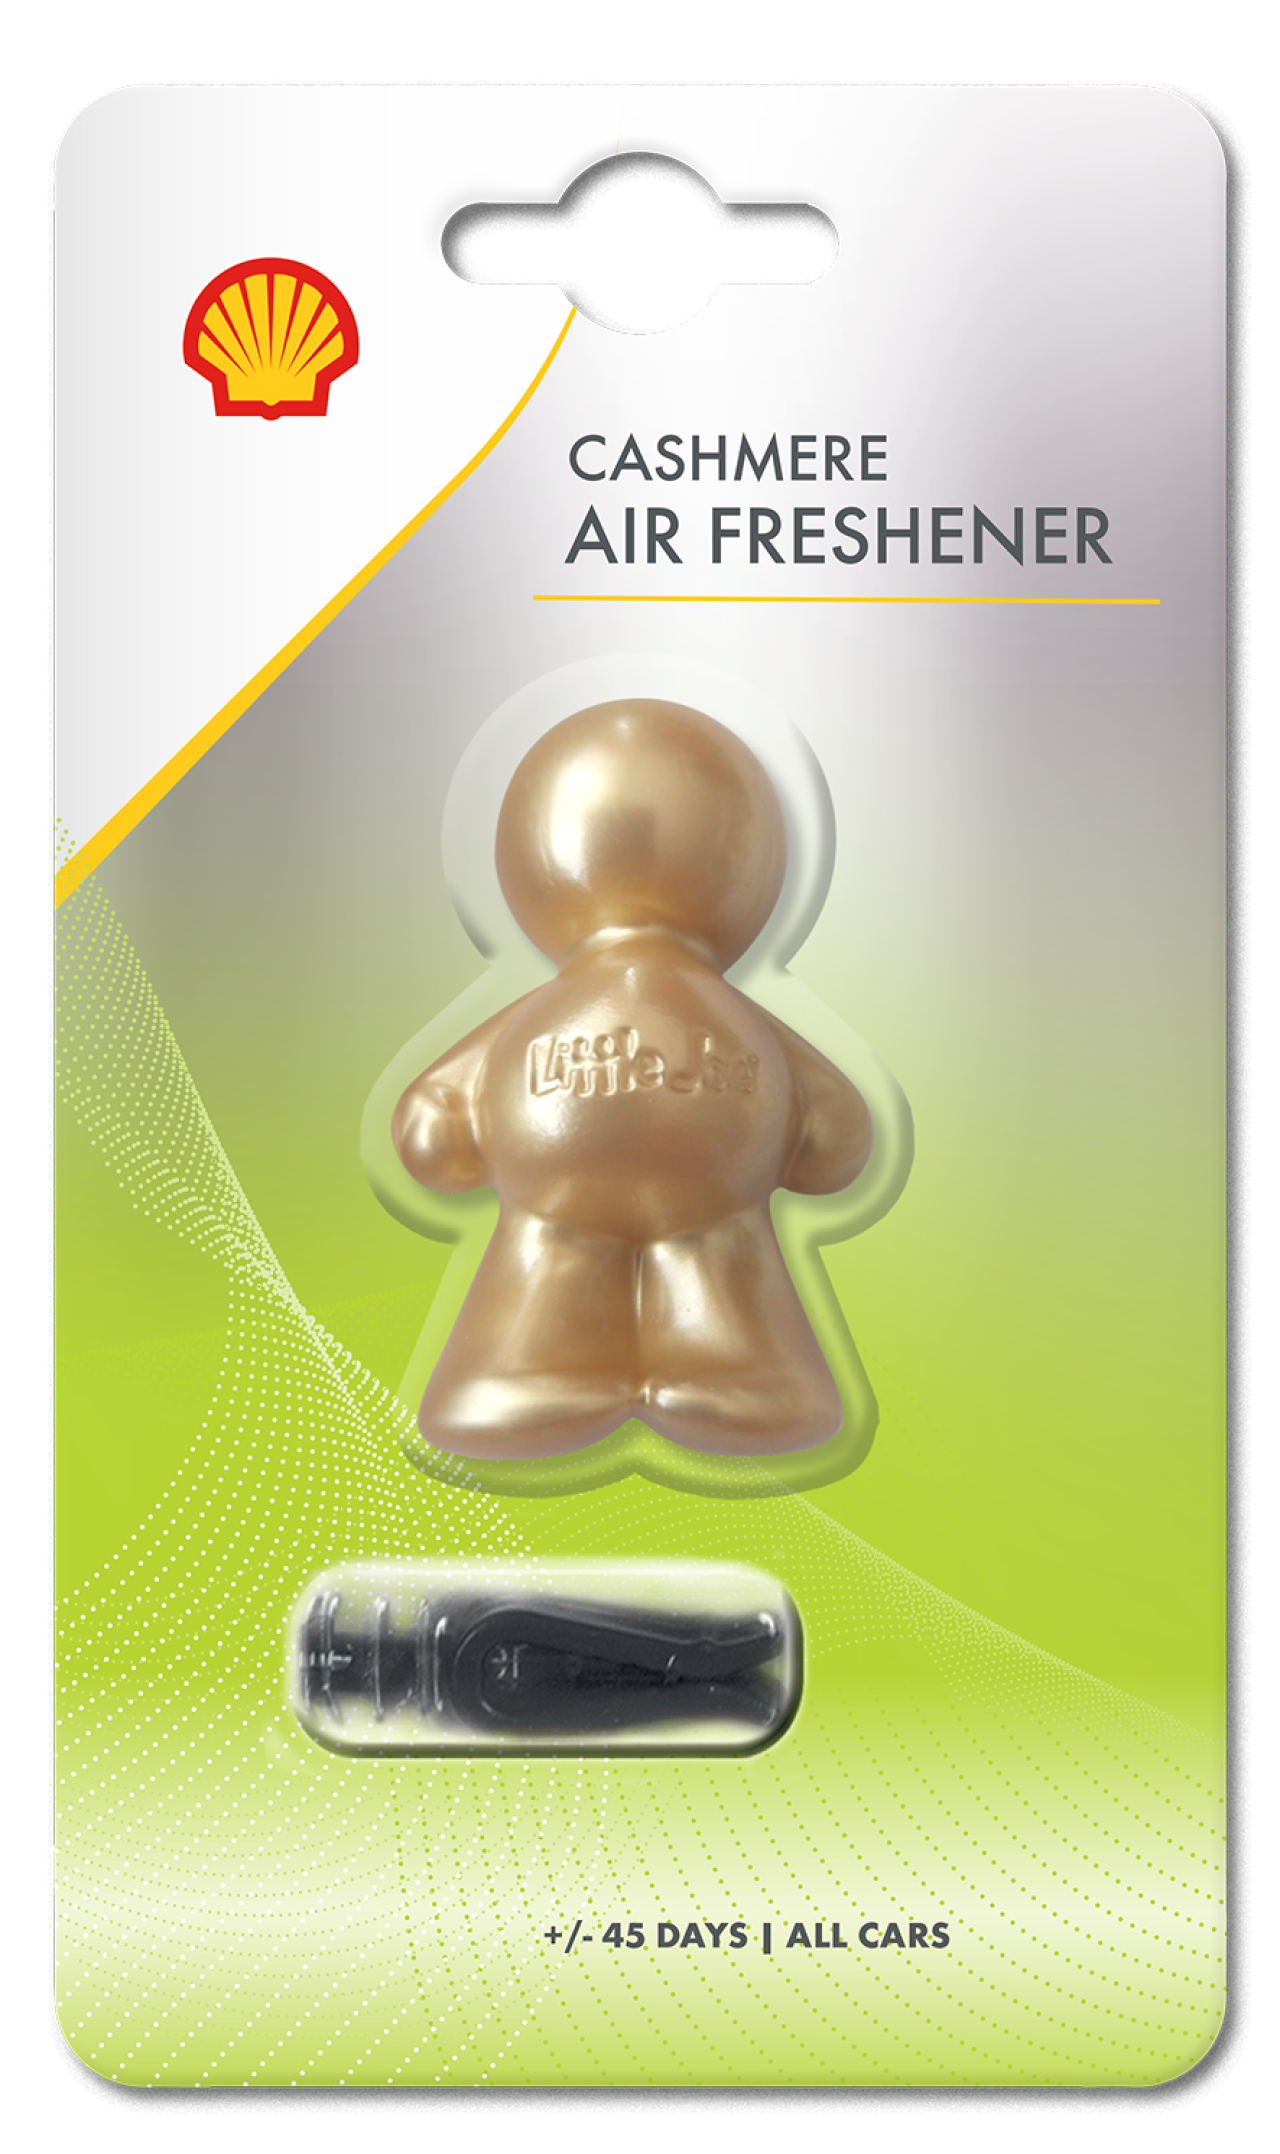 https://shellcarcareproducts.com/images/products/air-freshener-little-joe-shell-blister-pack-cashmere-west01946s40.png?resolution=1280x0&quality=85&type=webp&background=FFFFFFFF